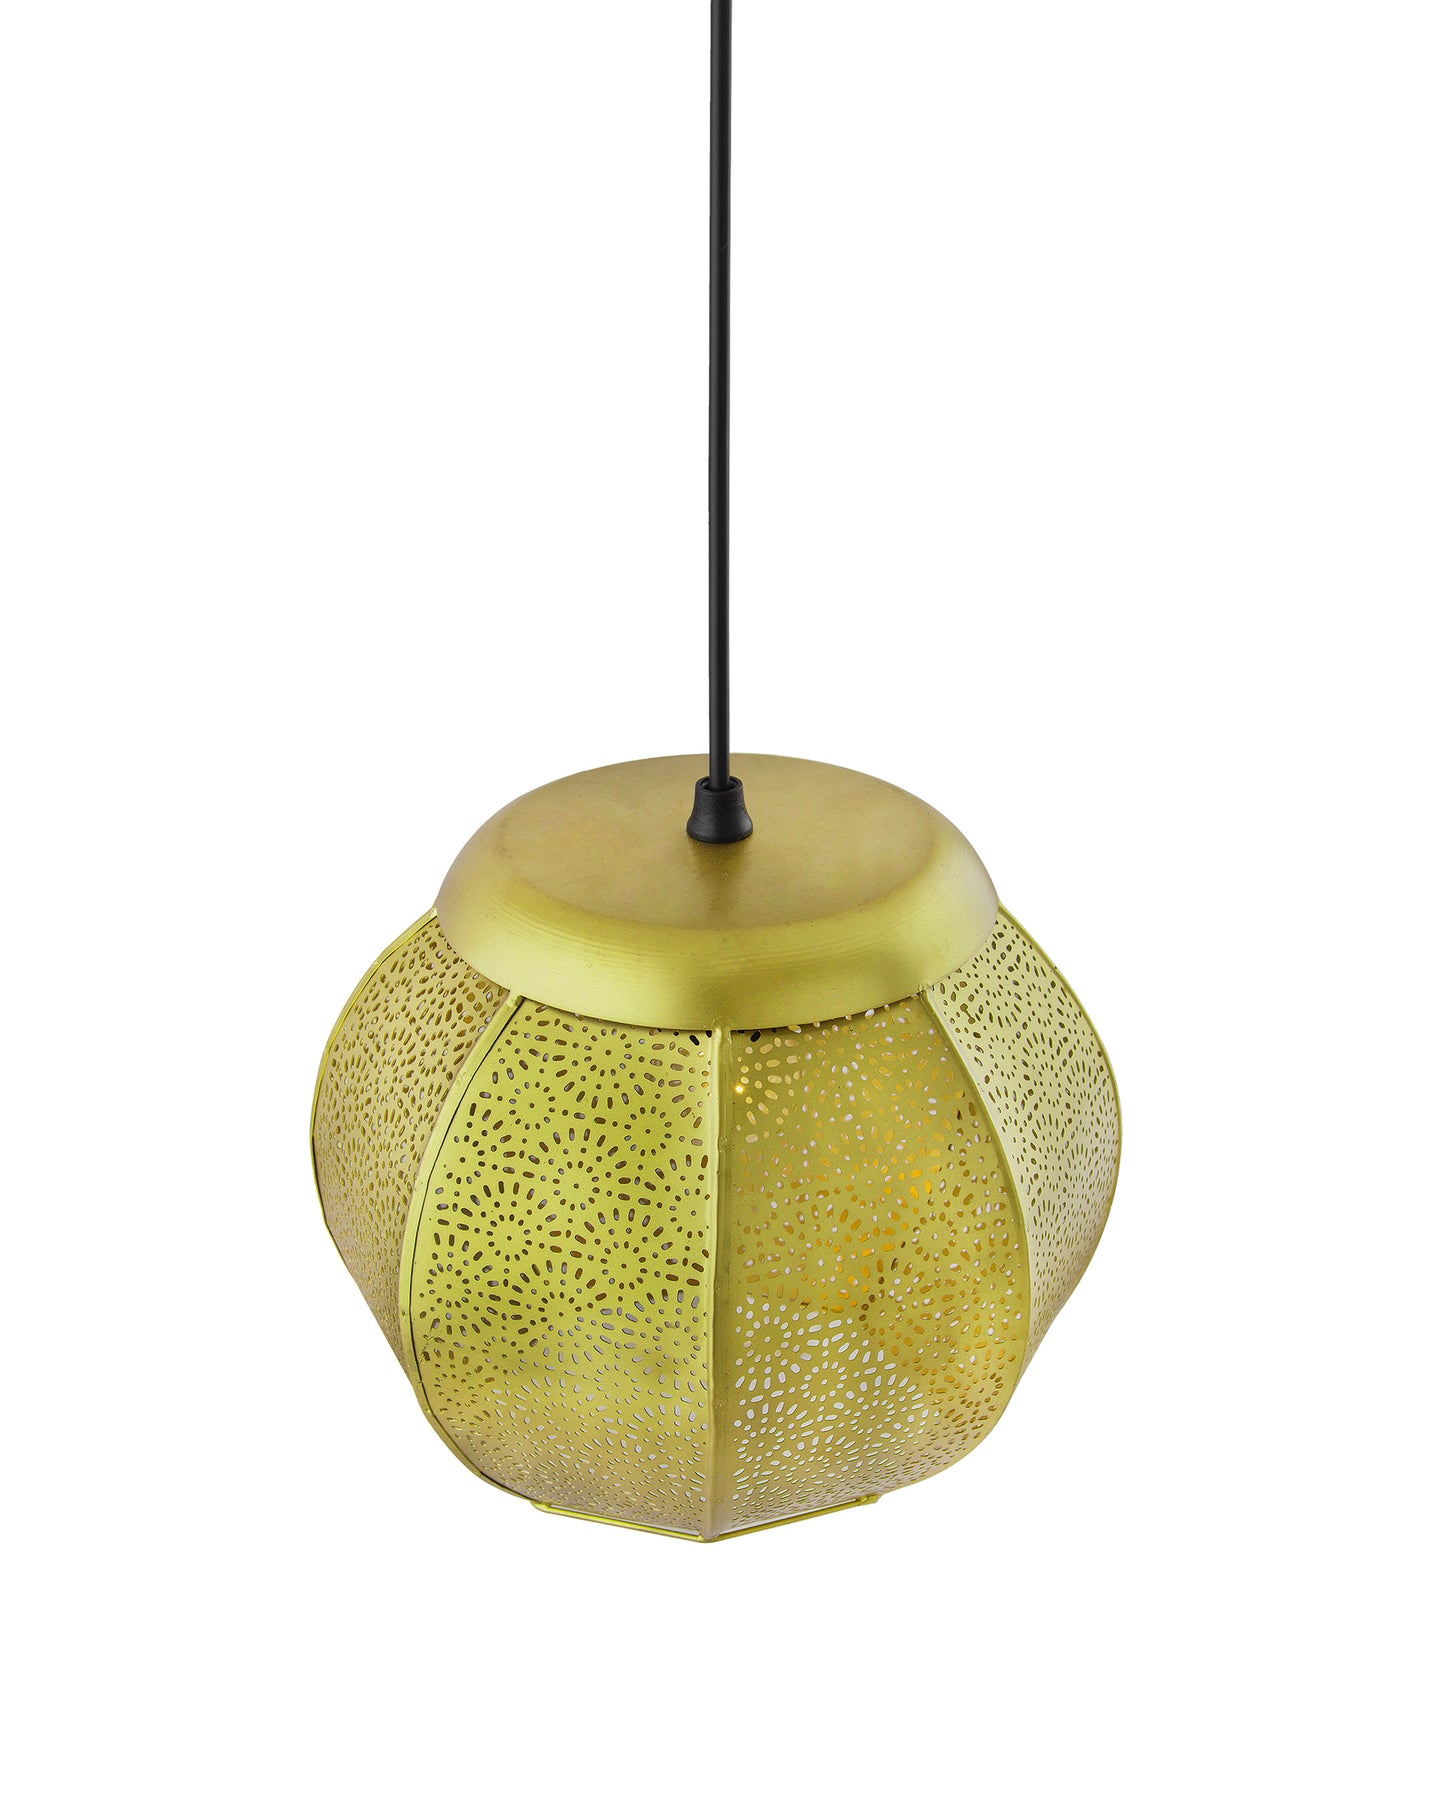 Classic Moroccan Golden hanging lamp, antique light Hanging Lamp Lights Round